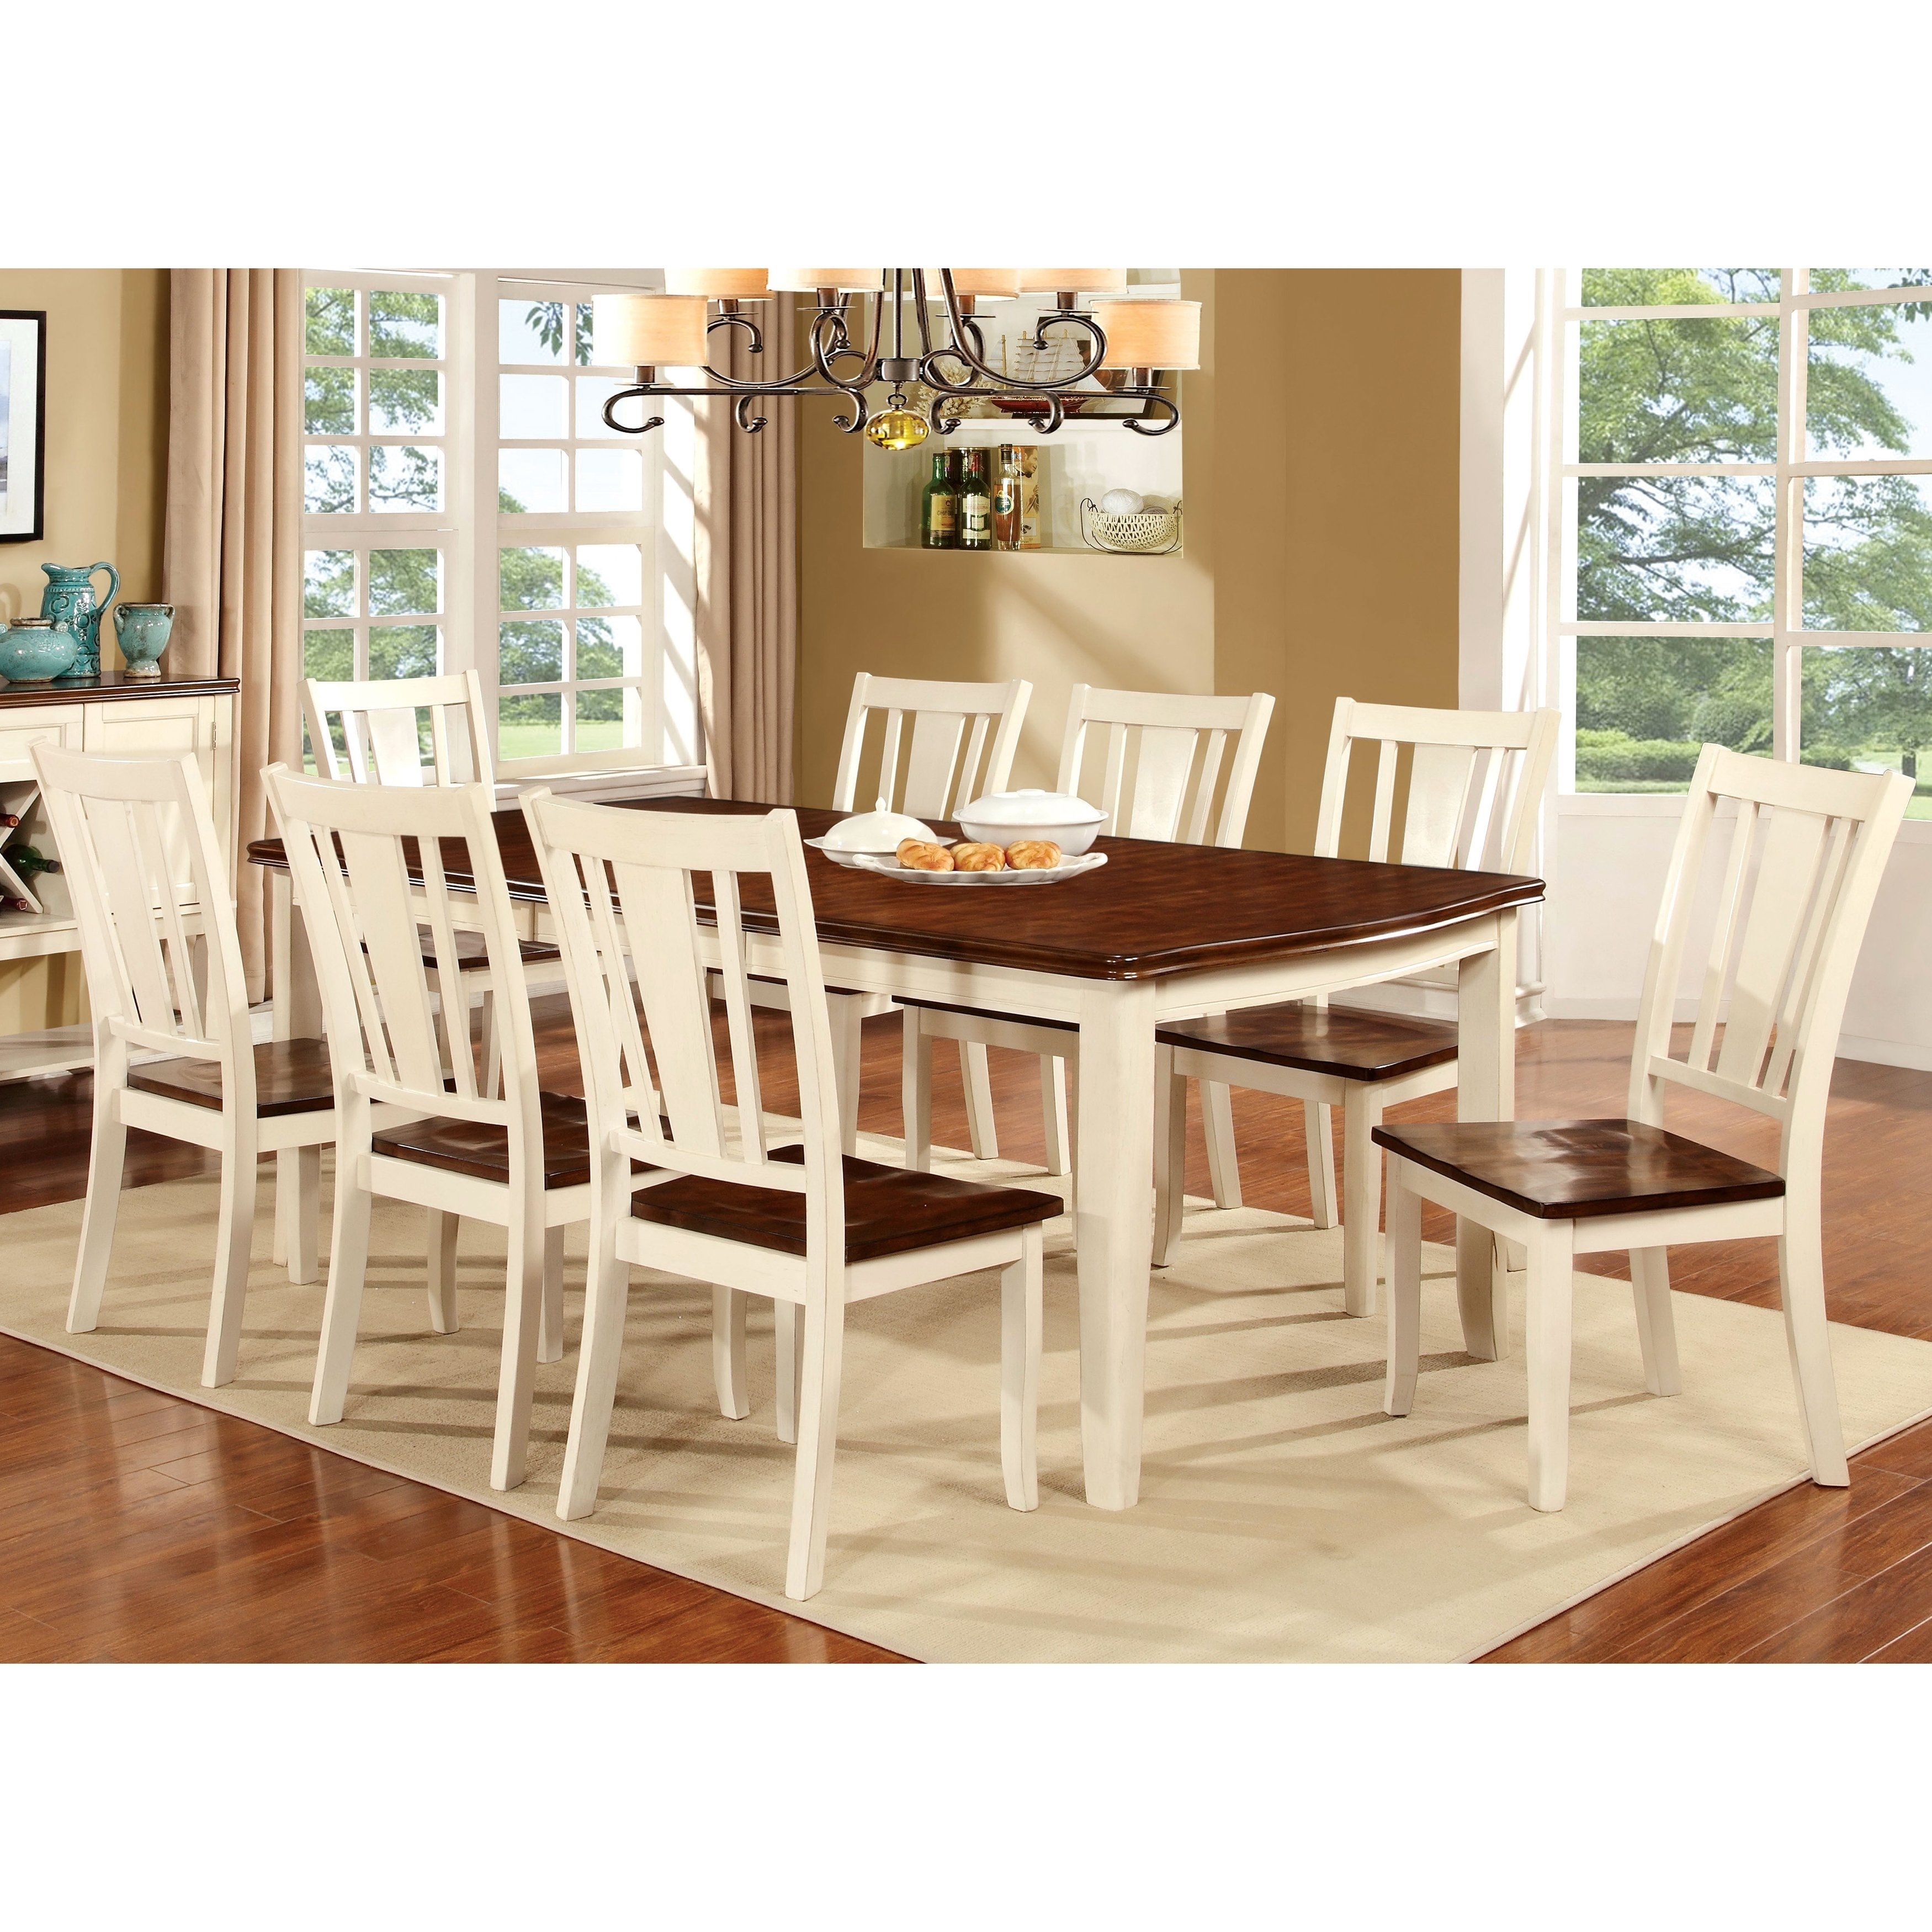 Buy Kitchen & Dining Room Sets Online At Overstock | Our Best Pertaining To Recent Craftsman 9 Piece Extension Dining Sets (View 13 of 20)